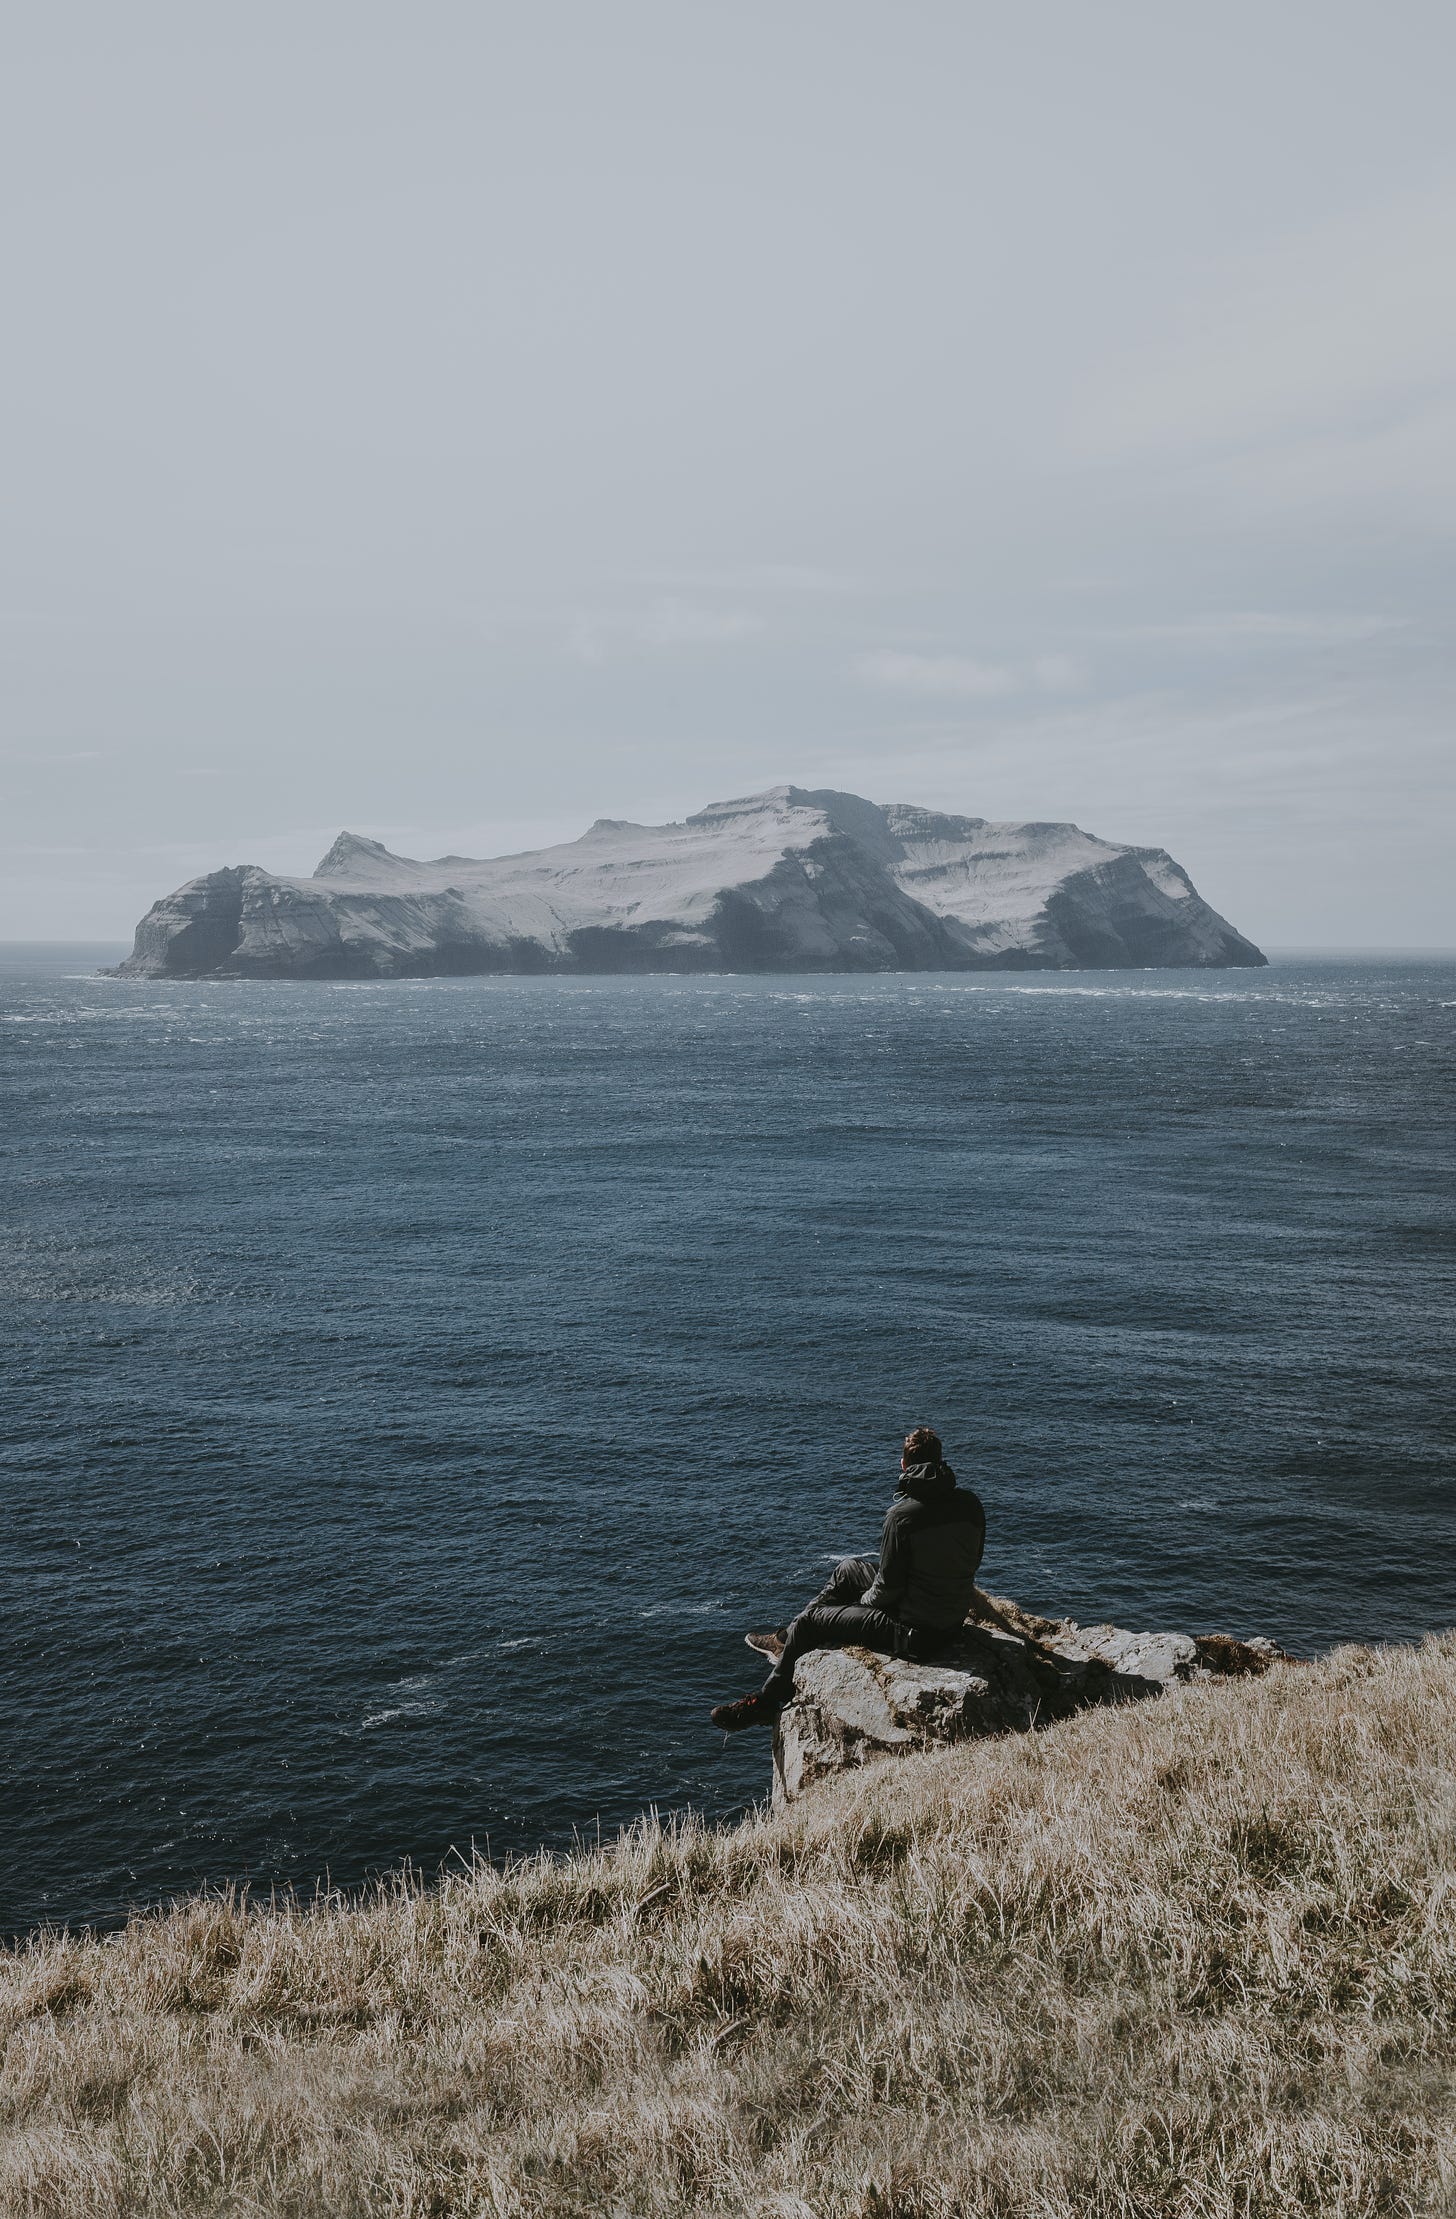 A man sitting on the edge of a cliff, looking out to a big rock in the ocean